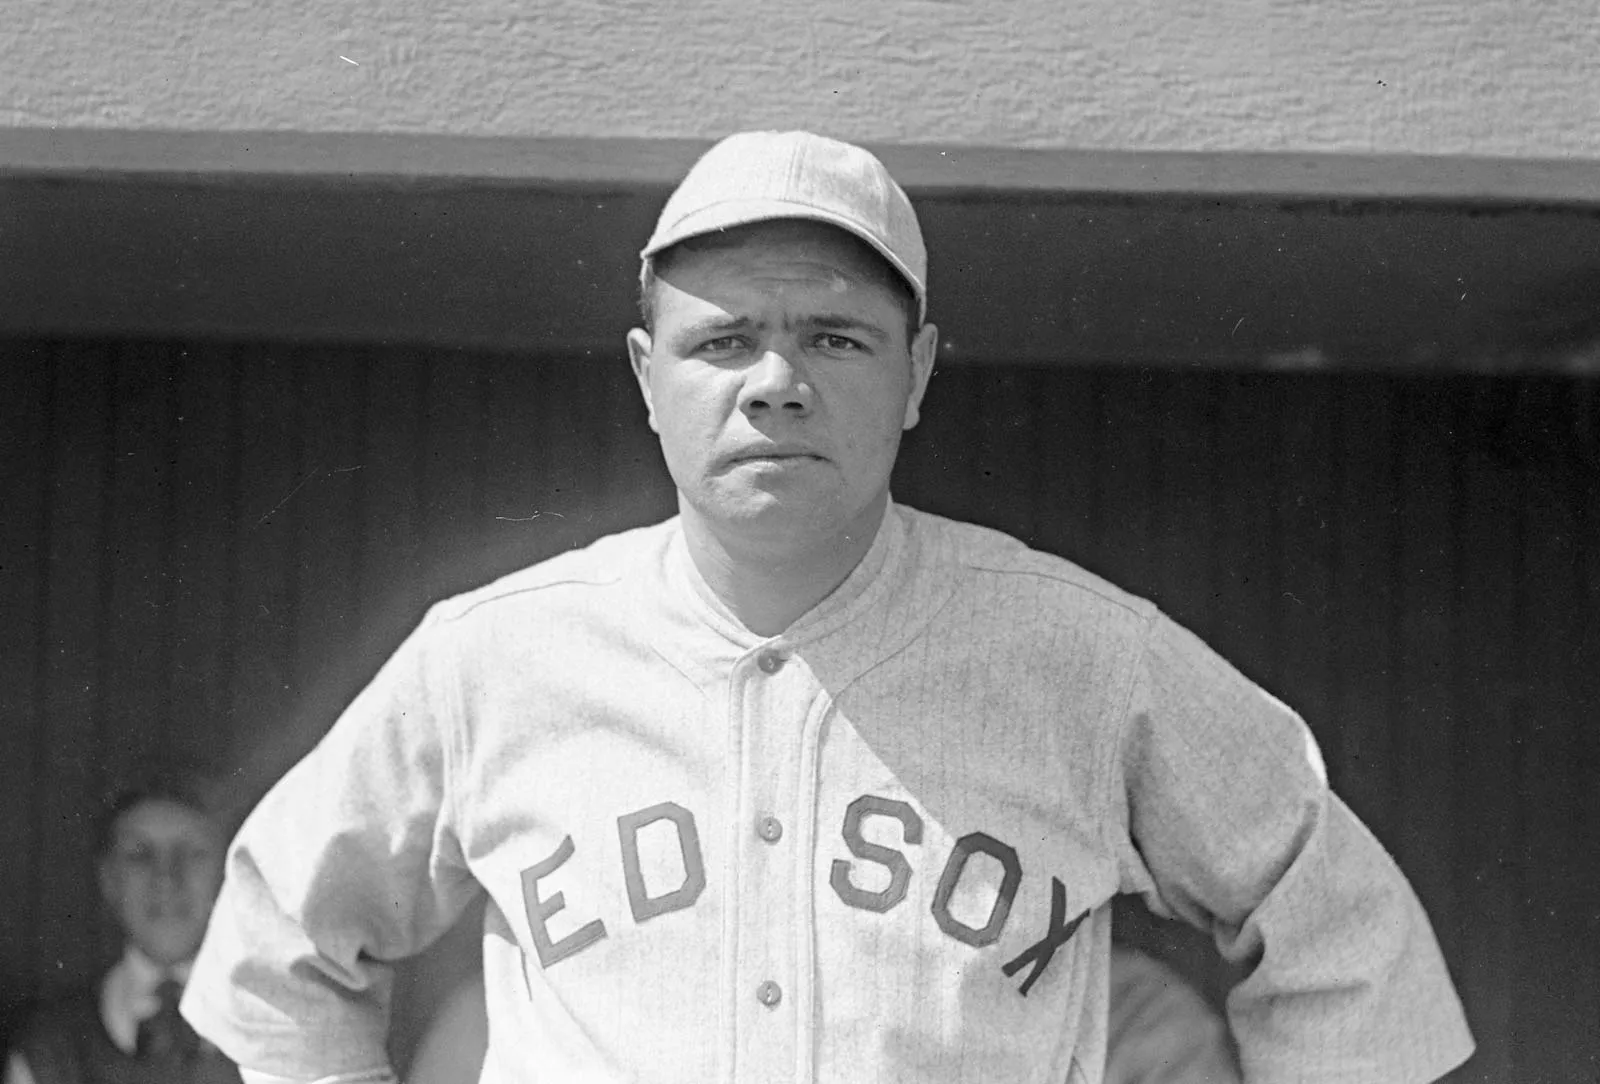 What was Babe Ruth's career ERA as a pitcher?